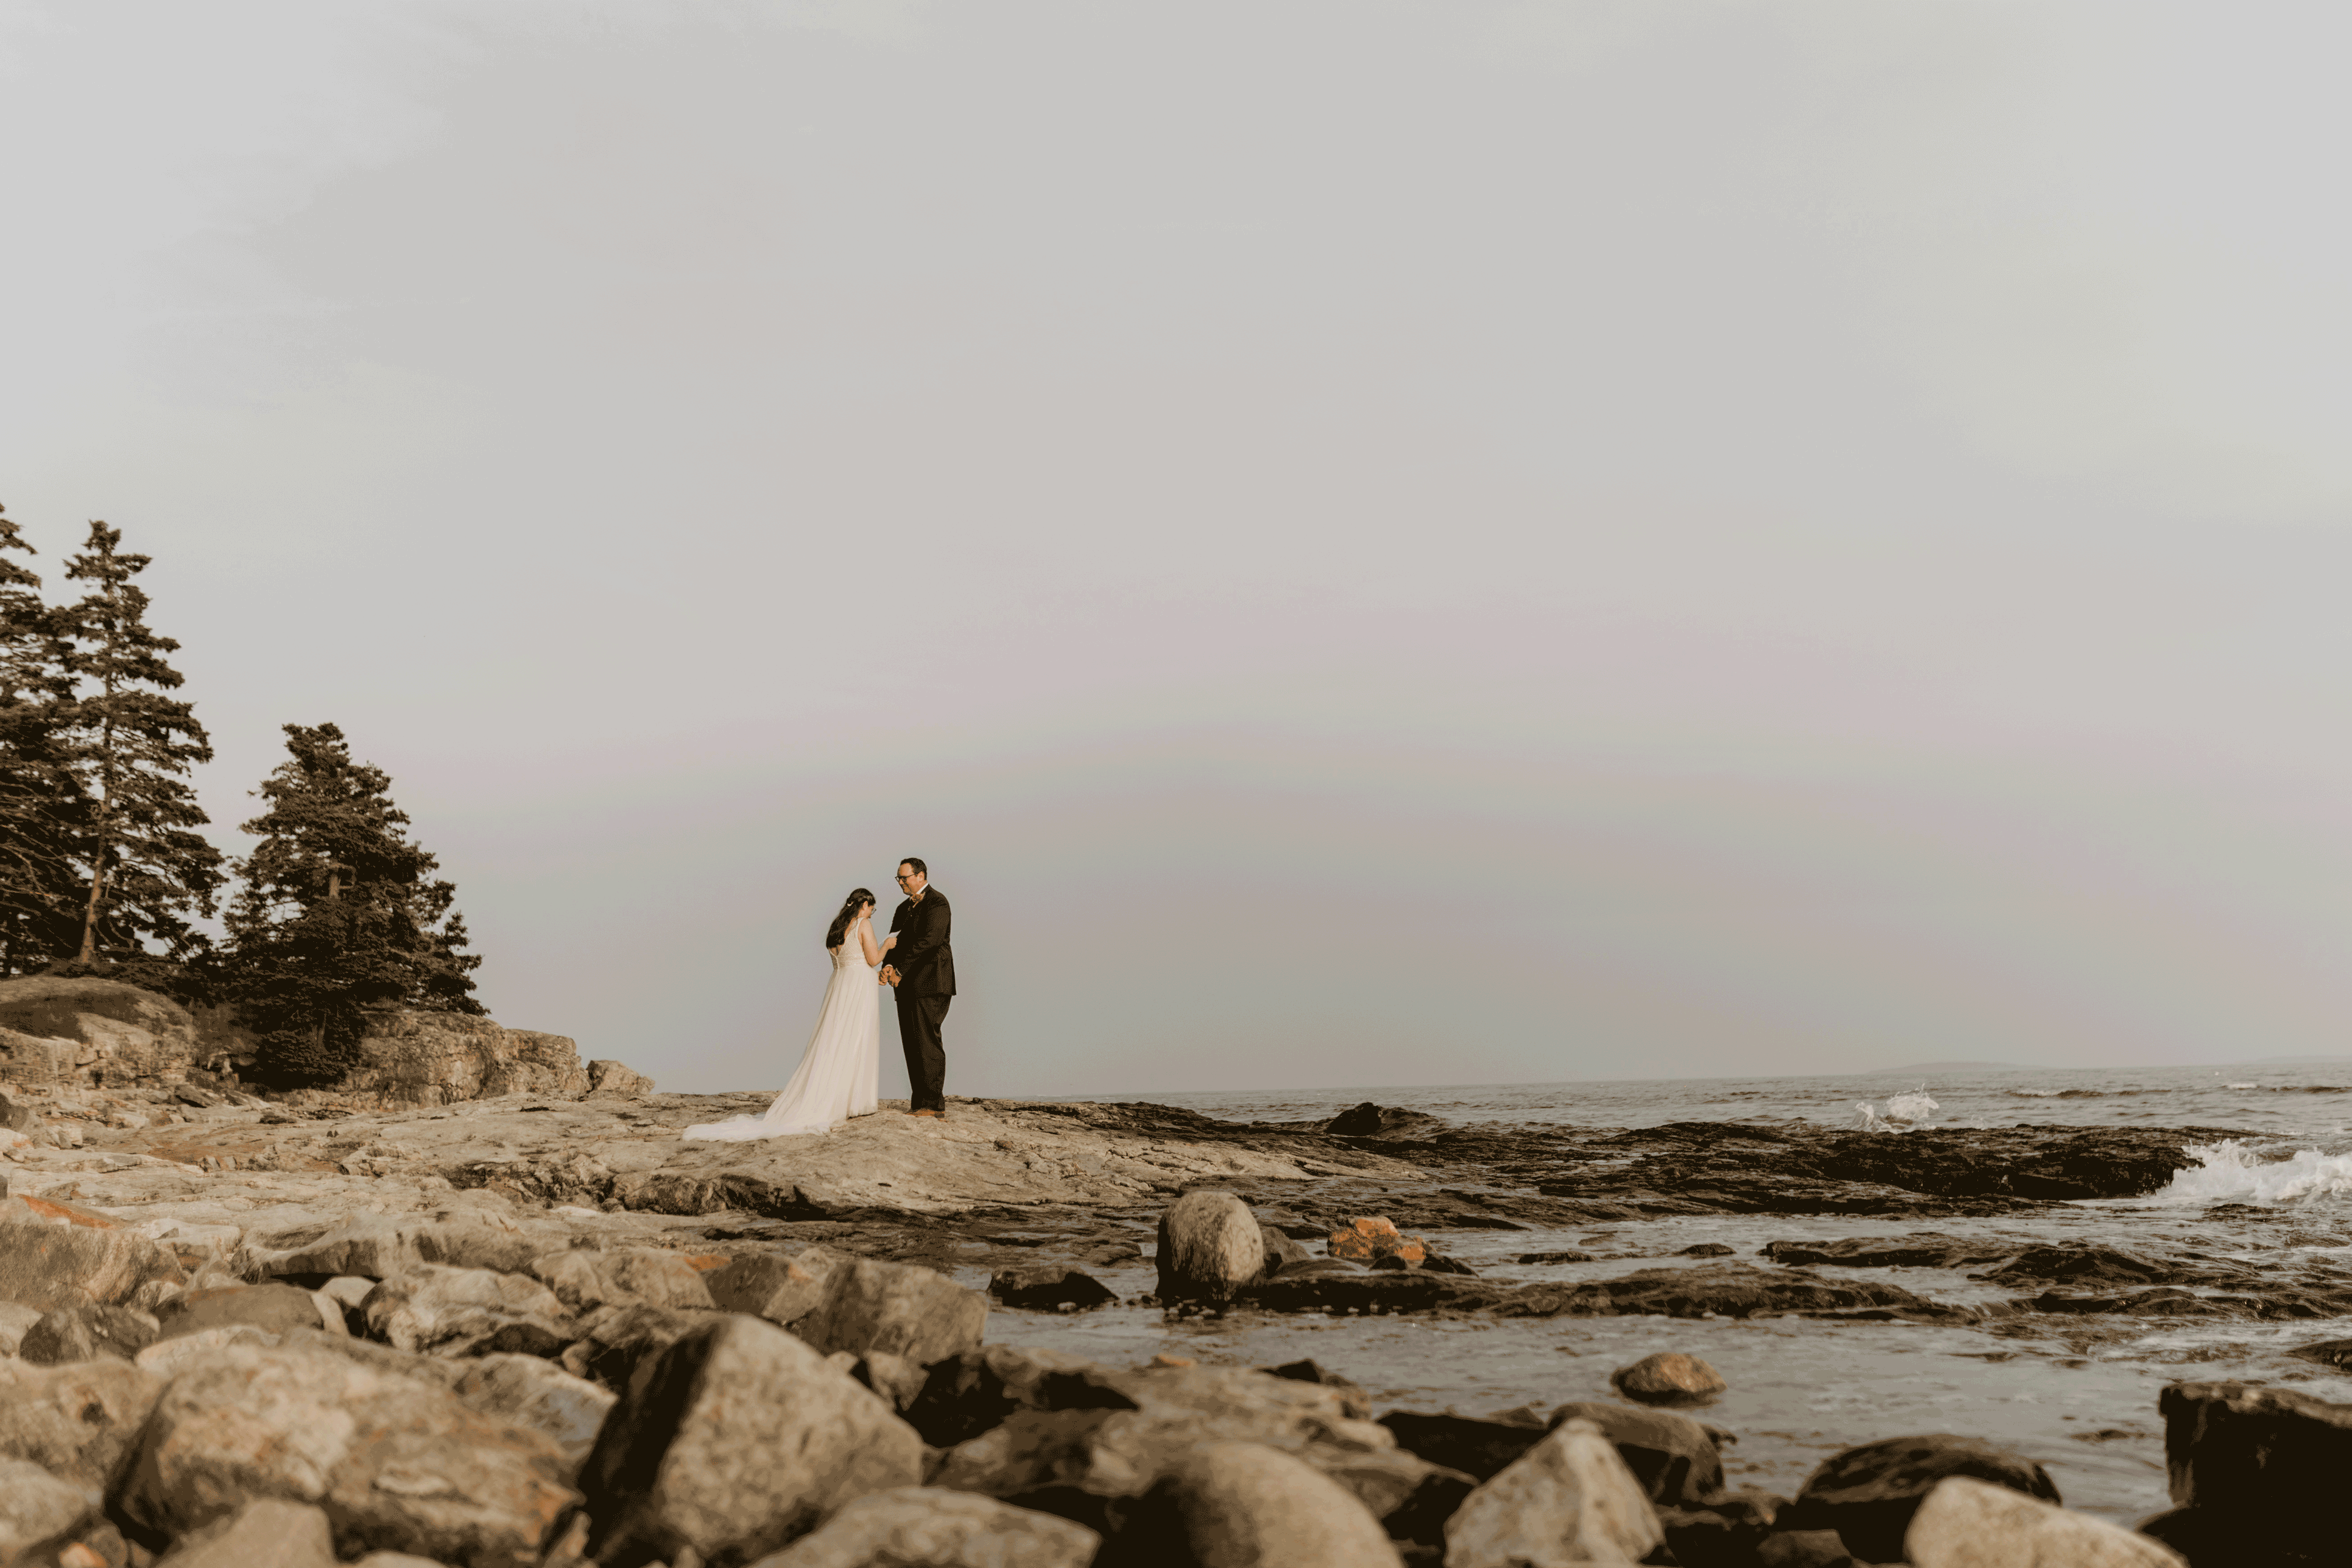 A bride and groom say their vows on their elopement day off the coast of Maine.